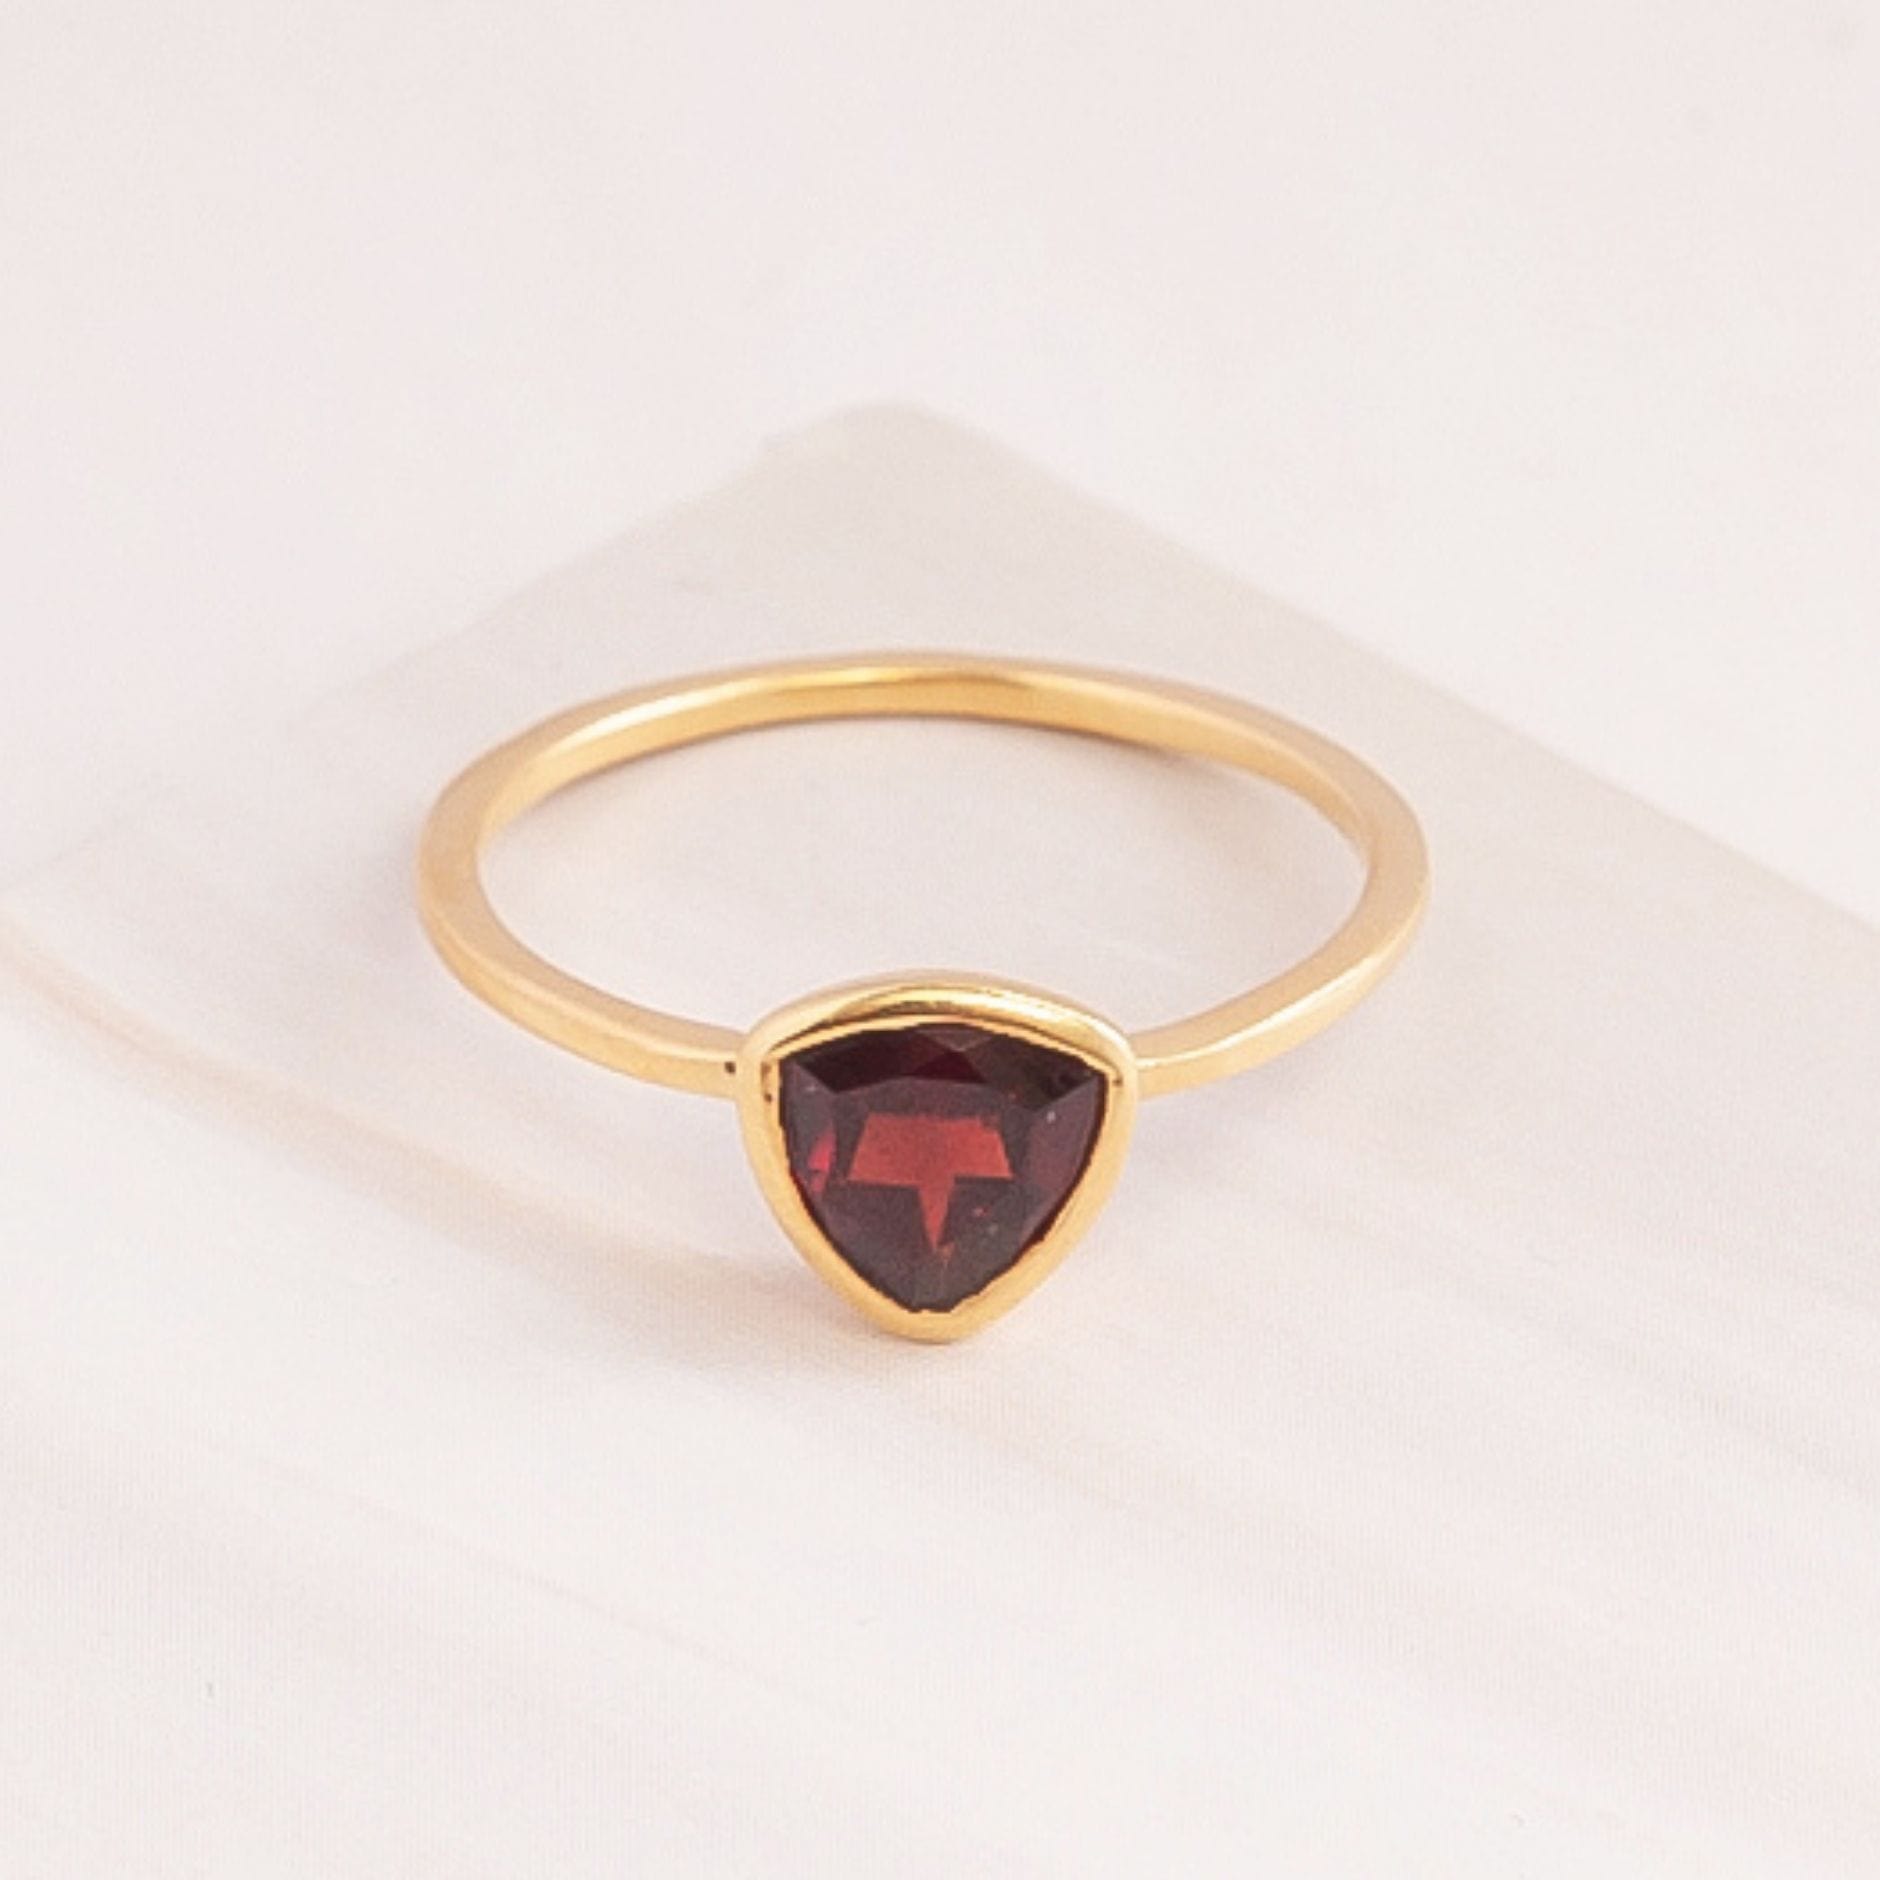 Emblem Jewelry Rings Red Garnet / Triangle Signature Candy Gemstone Stack Rings (Ring Size 5)